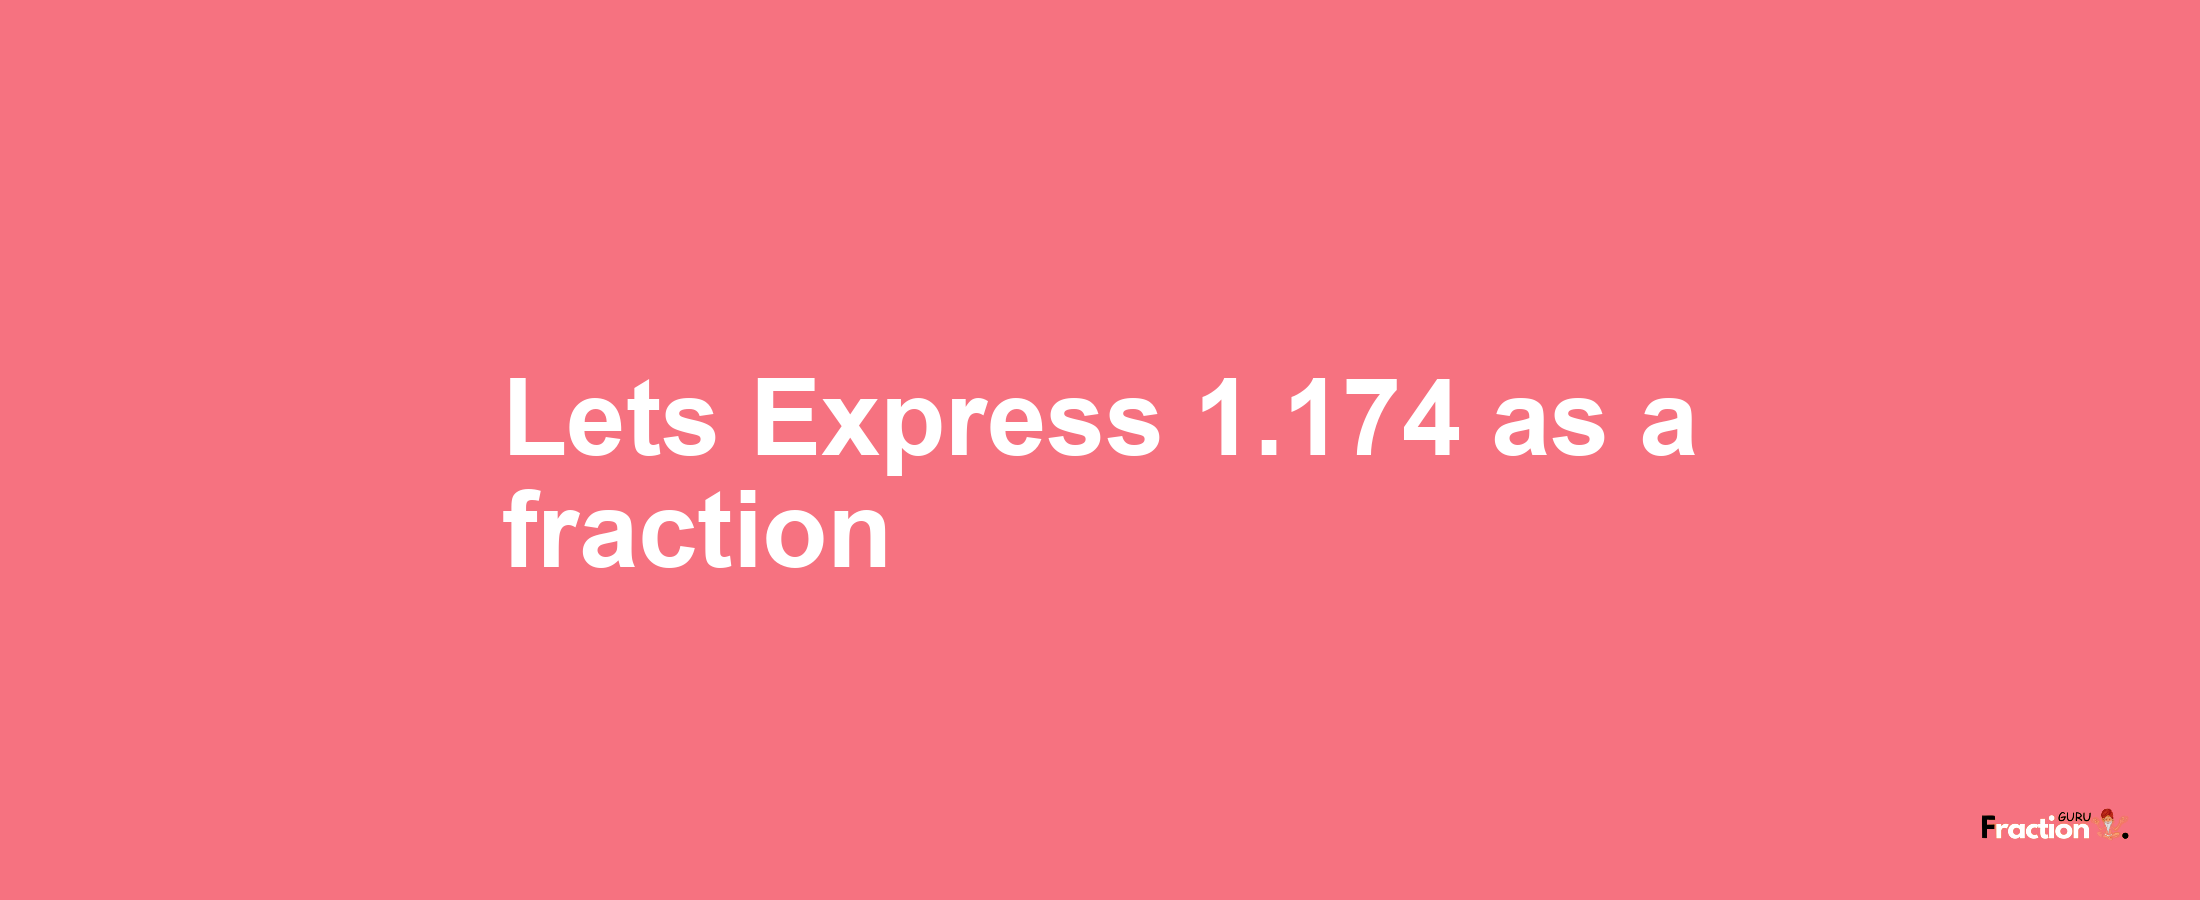 Lets Express 1.174 as afraction